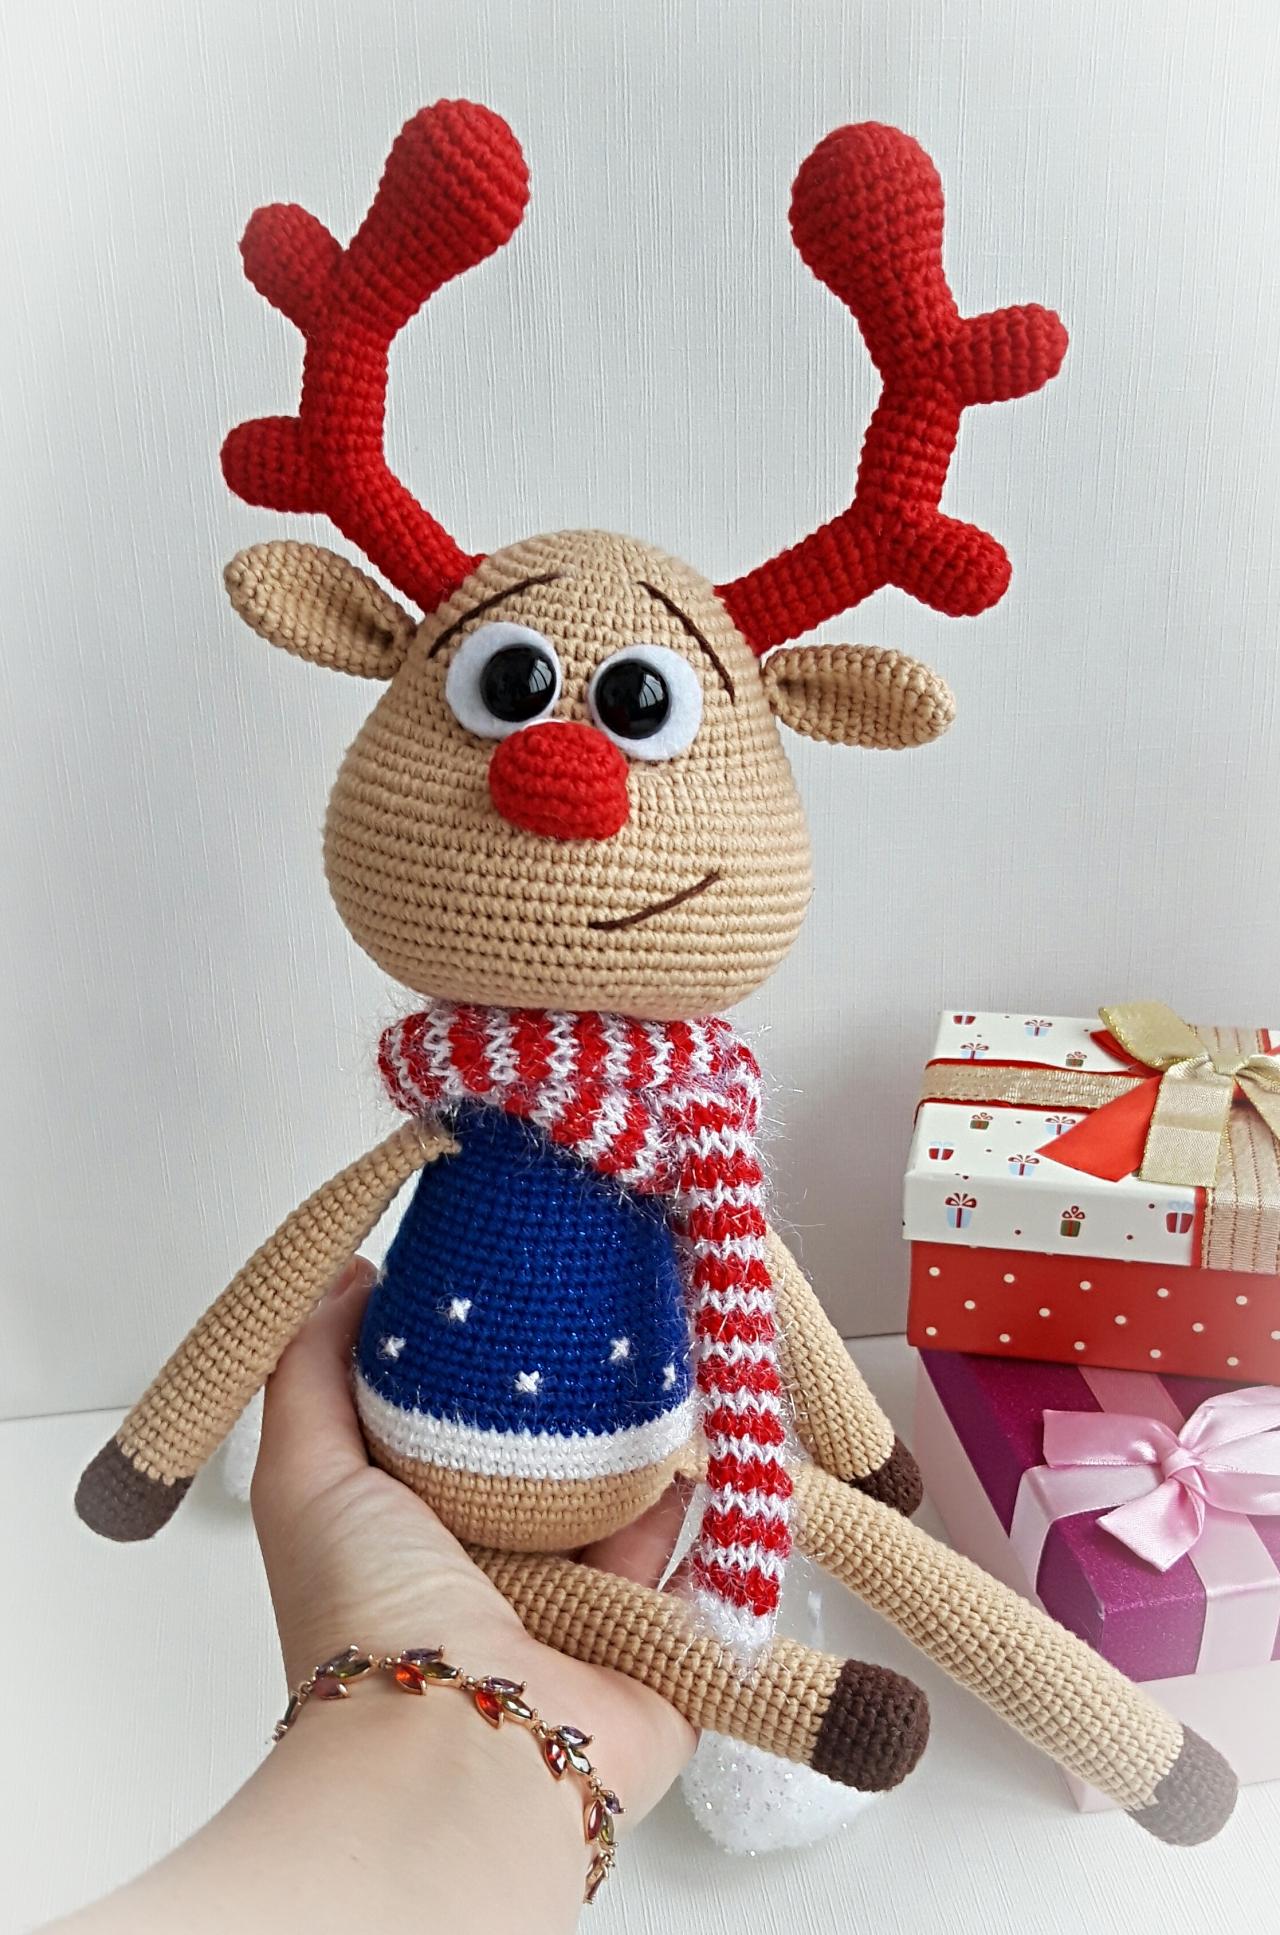 Plush Beige Deer Toy,gifts For Christmas Holiday,gift Idea For Birthday,stuffed Animals Toys,gift For Boys,crochet Deer Toy,gift For Girl